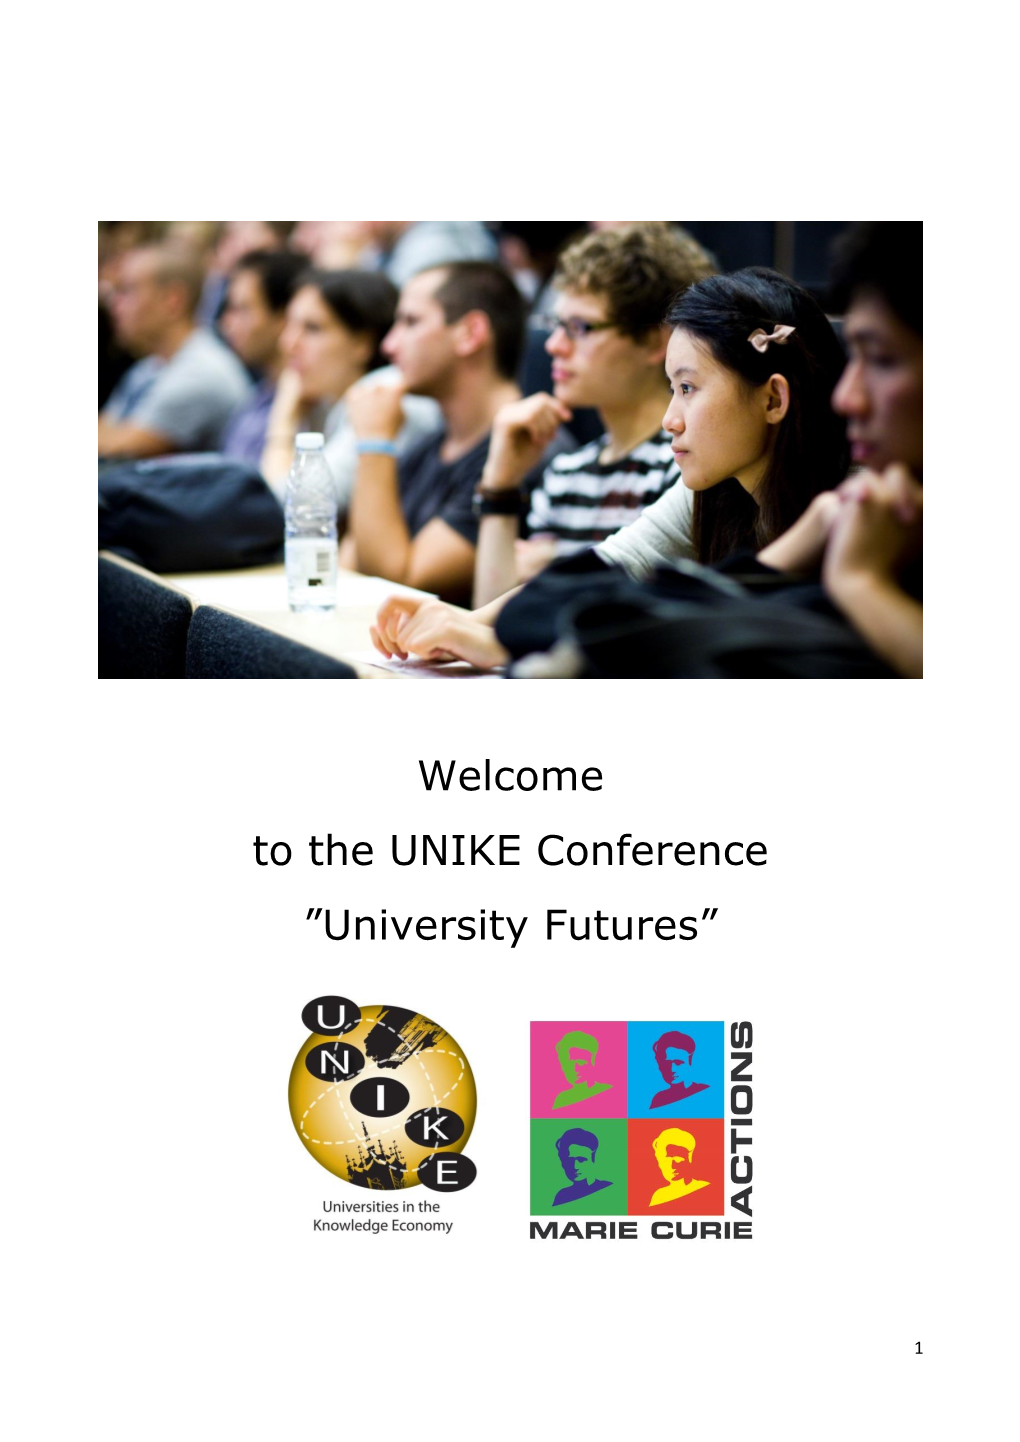 Welcome to the UNIKE Conference ”University Futures”